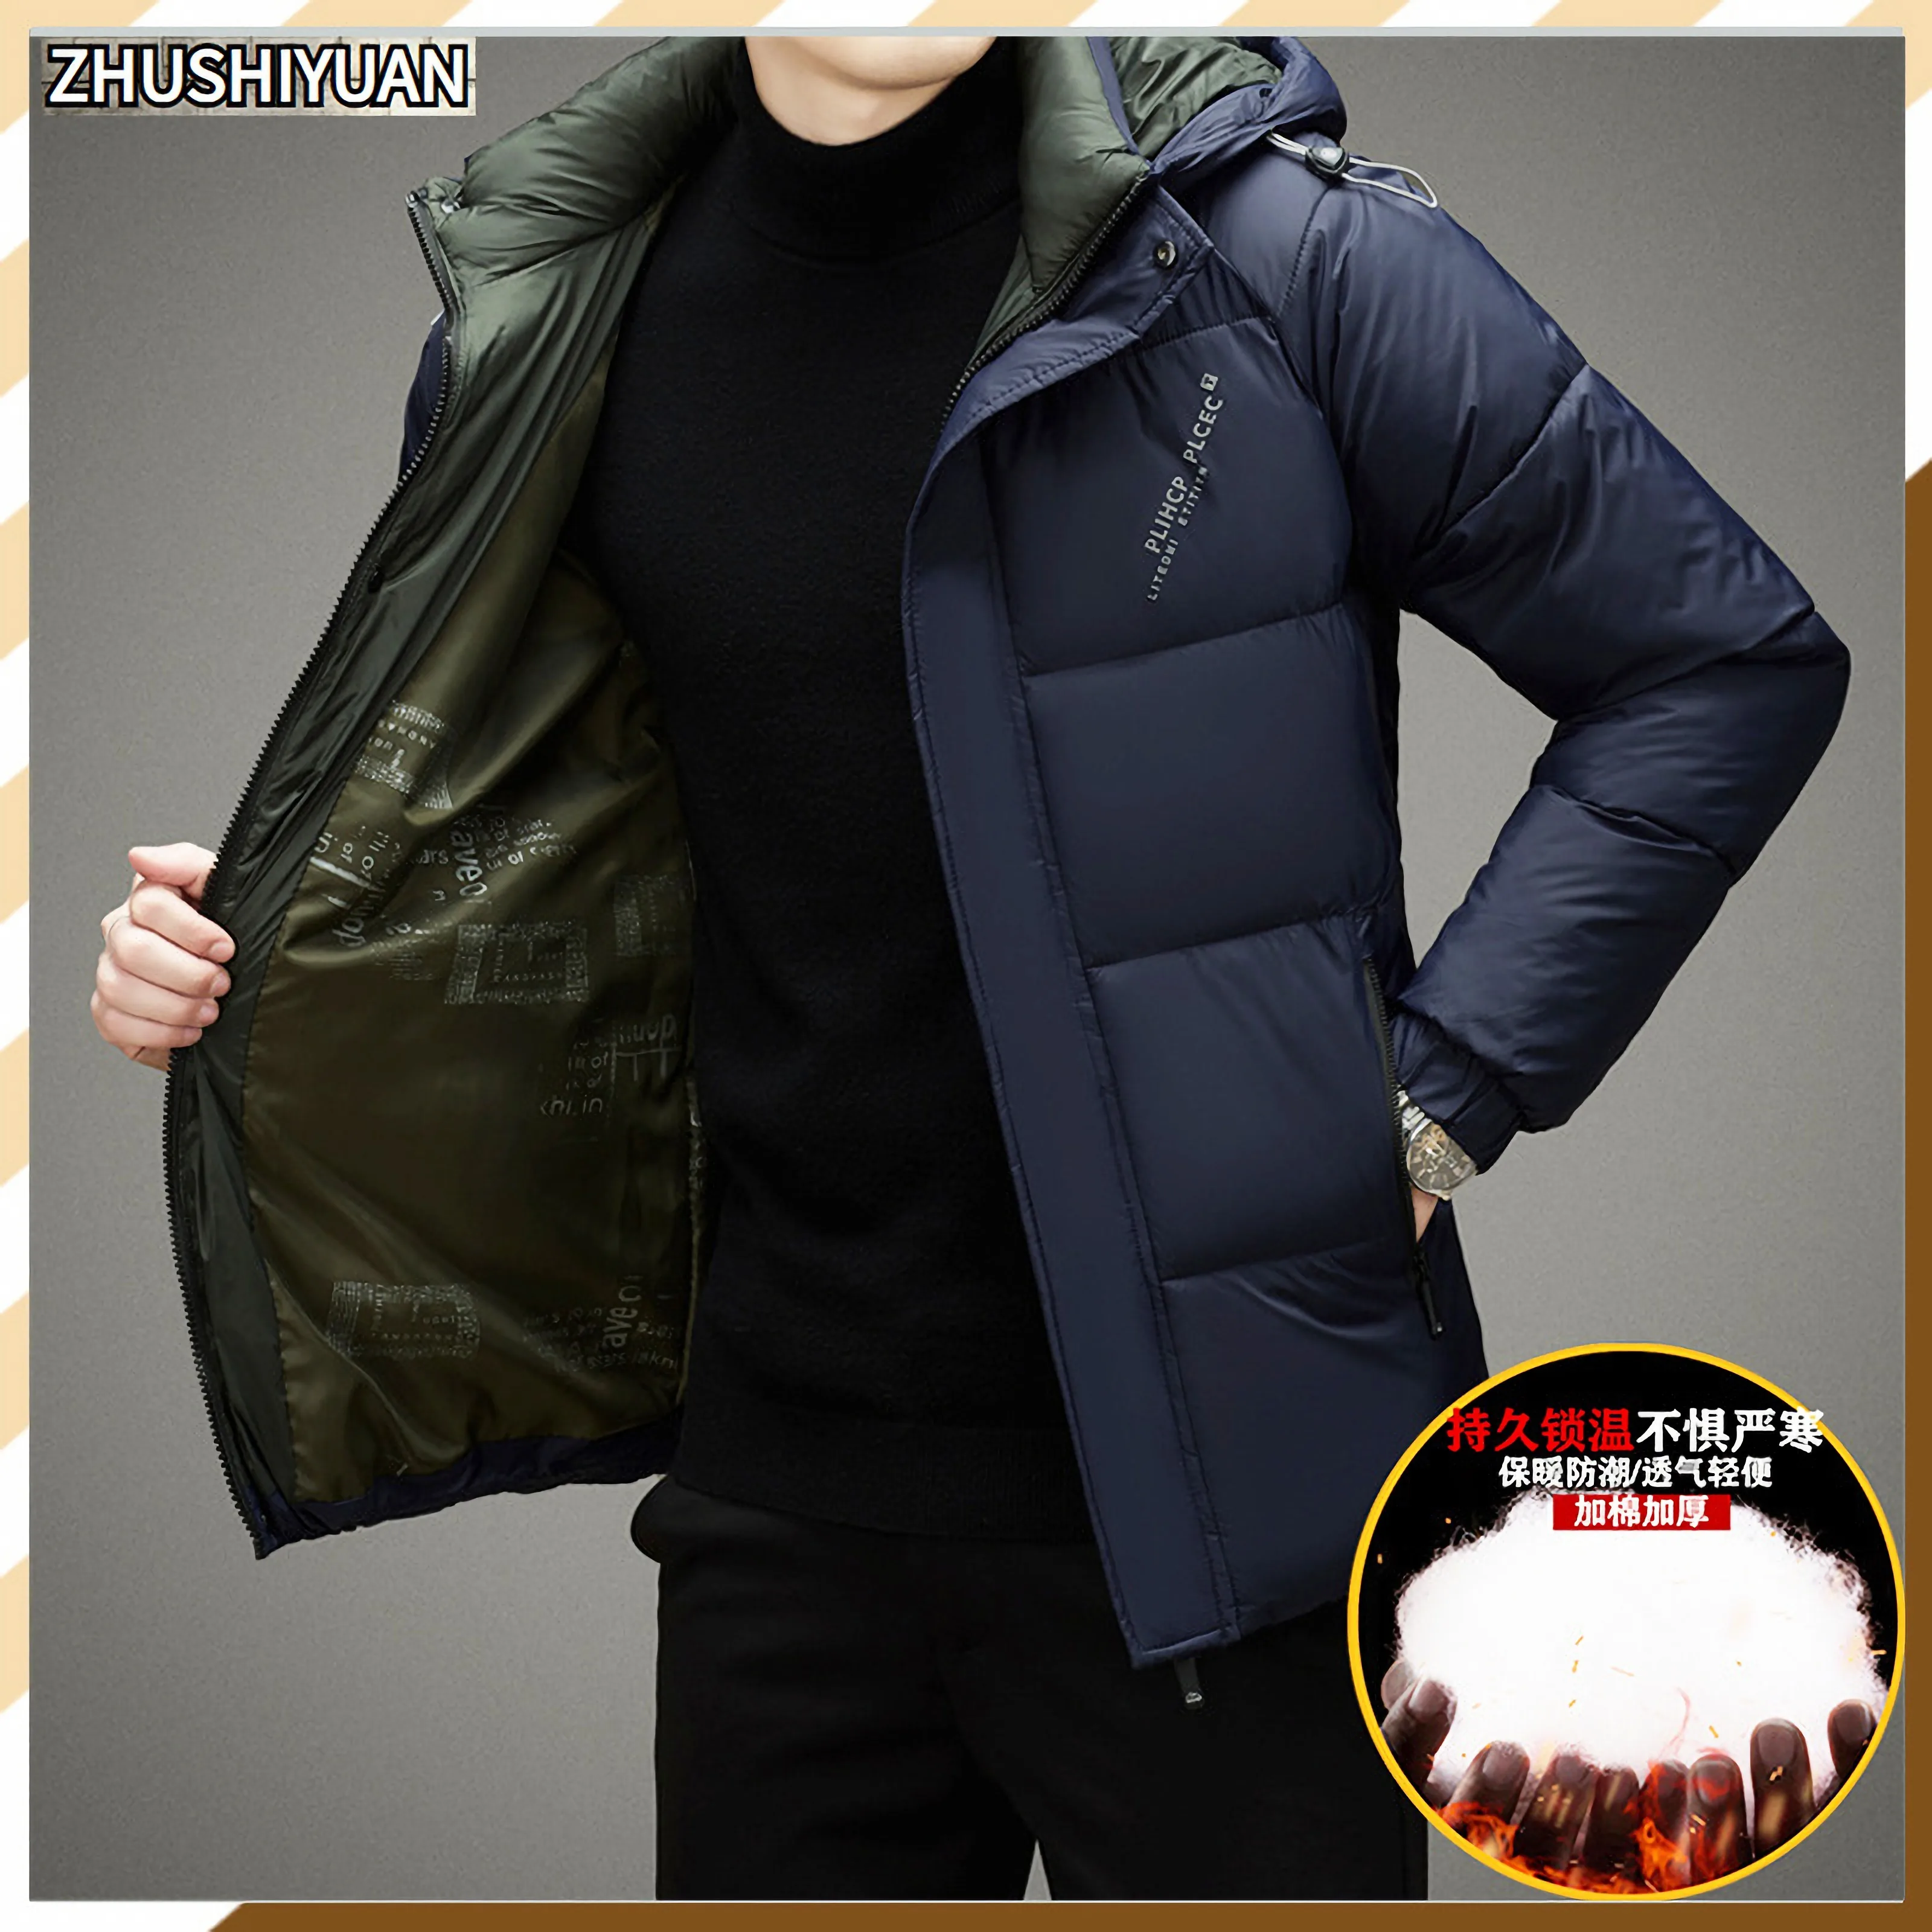 High Quality Winter Jacket With Hoodie For Men Parkas Jaqueta Masculina Doudoune Homme Chamarras Para Hombre 2022 Jackets Coats